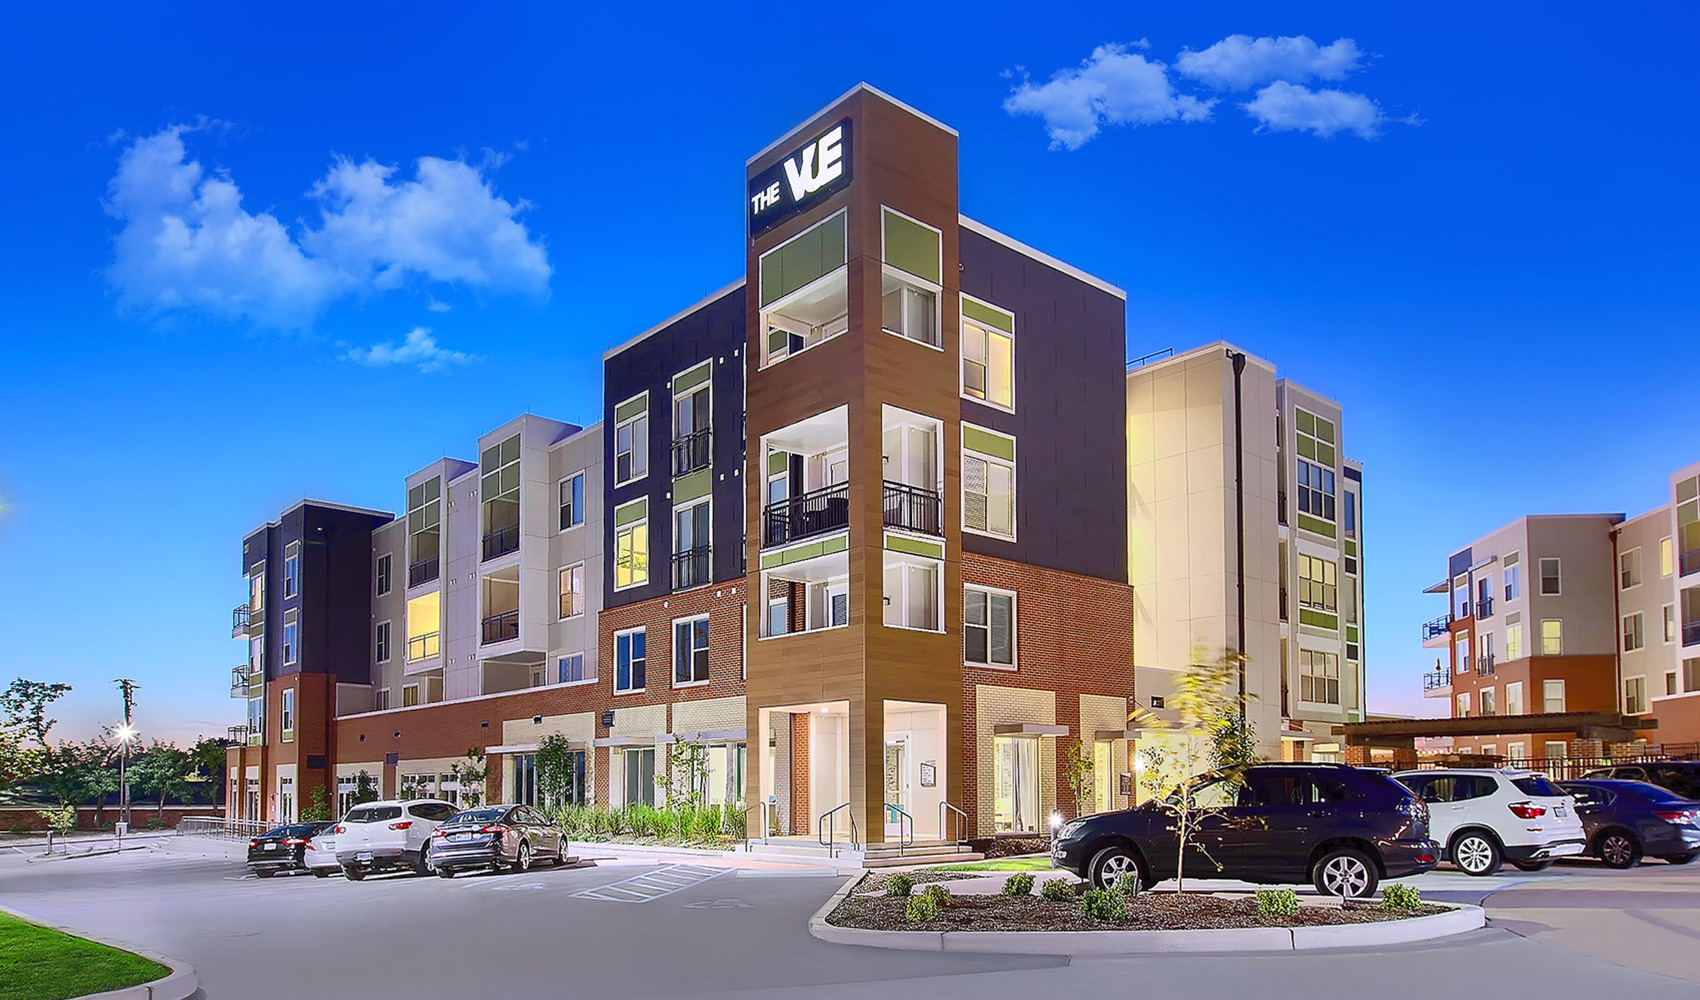 The Vue at Creve Coeur Apartments in Creve Coeur, MO